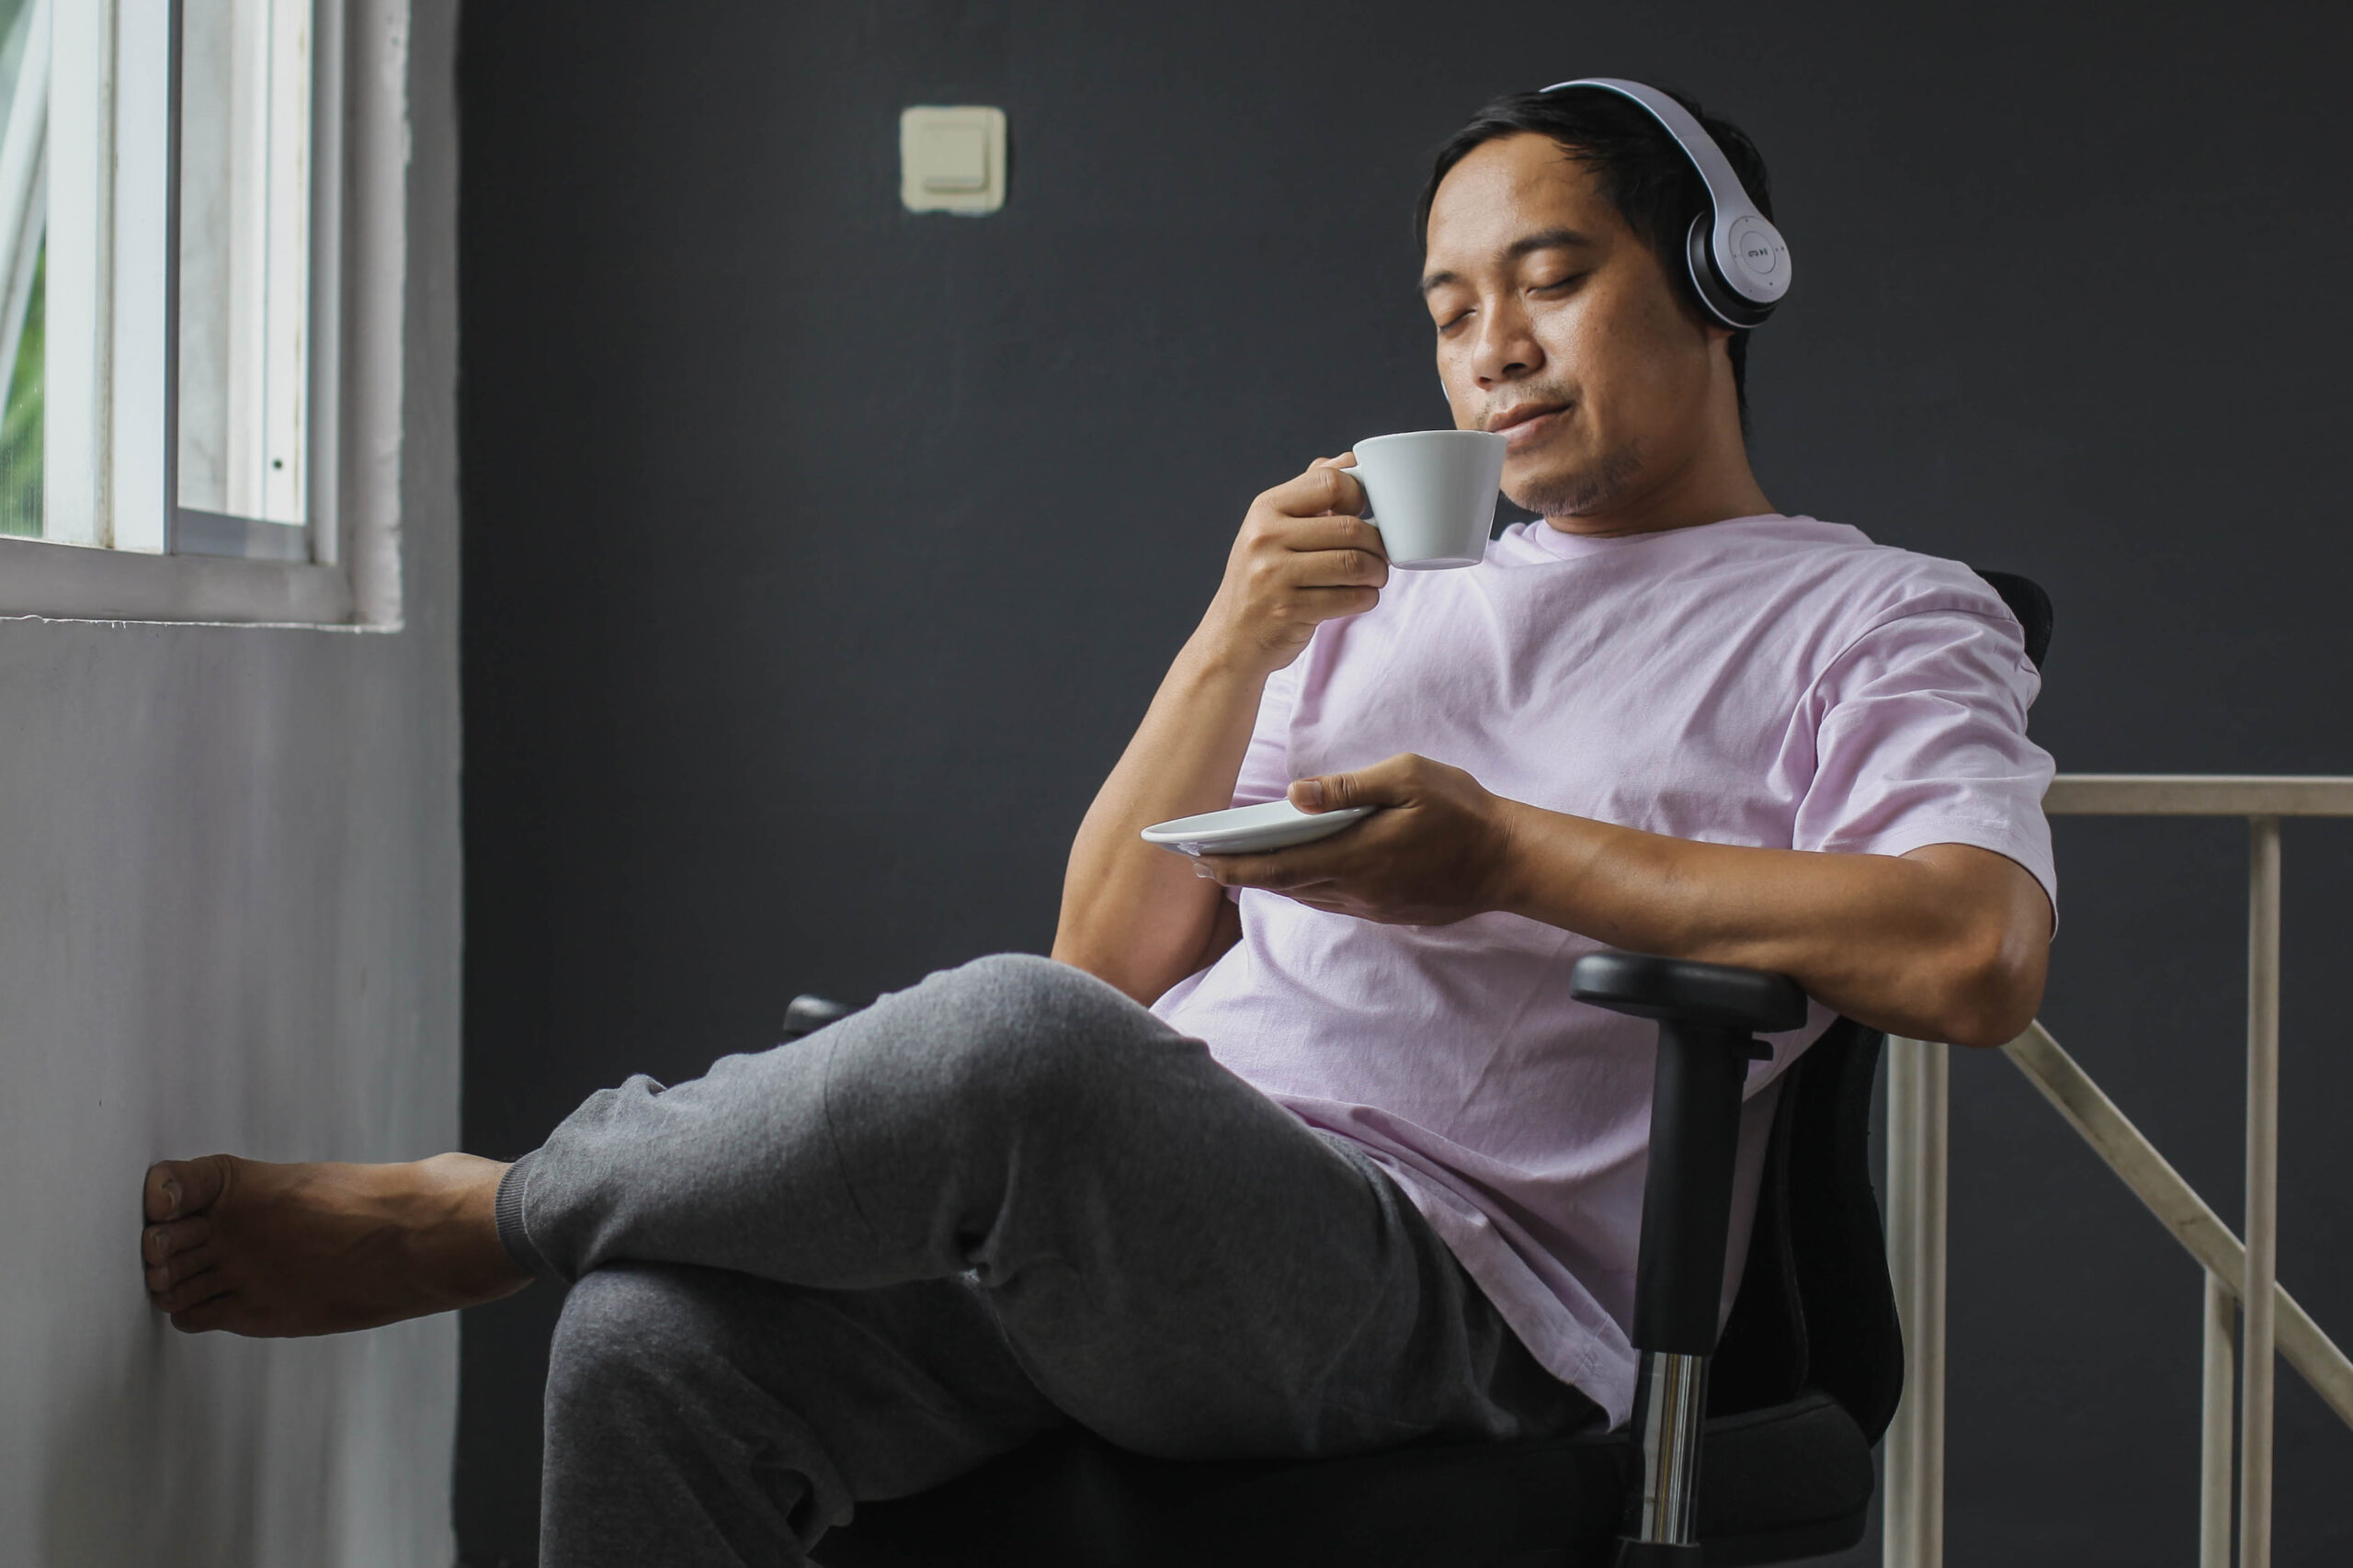 Photo of a Black man sitting in a chair, drinking coffee with headphones on and phone in hand.